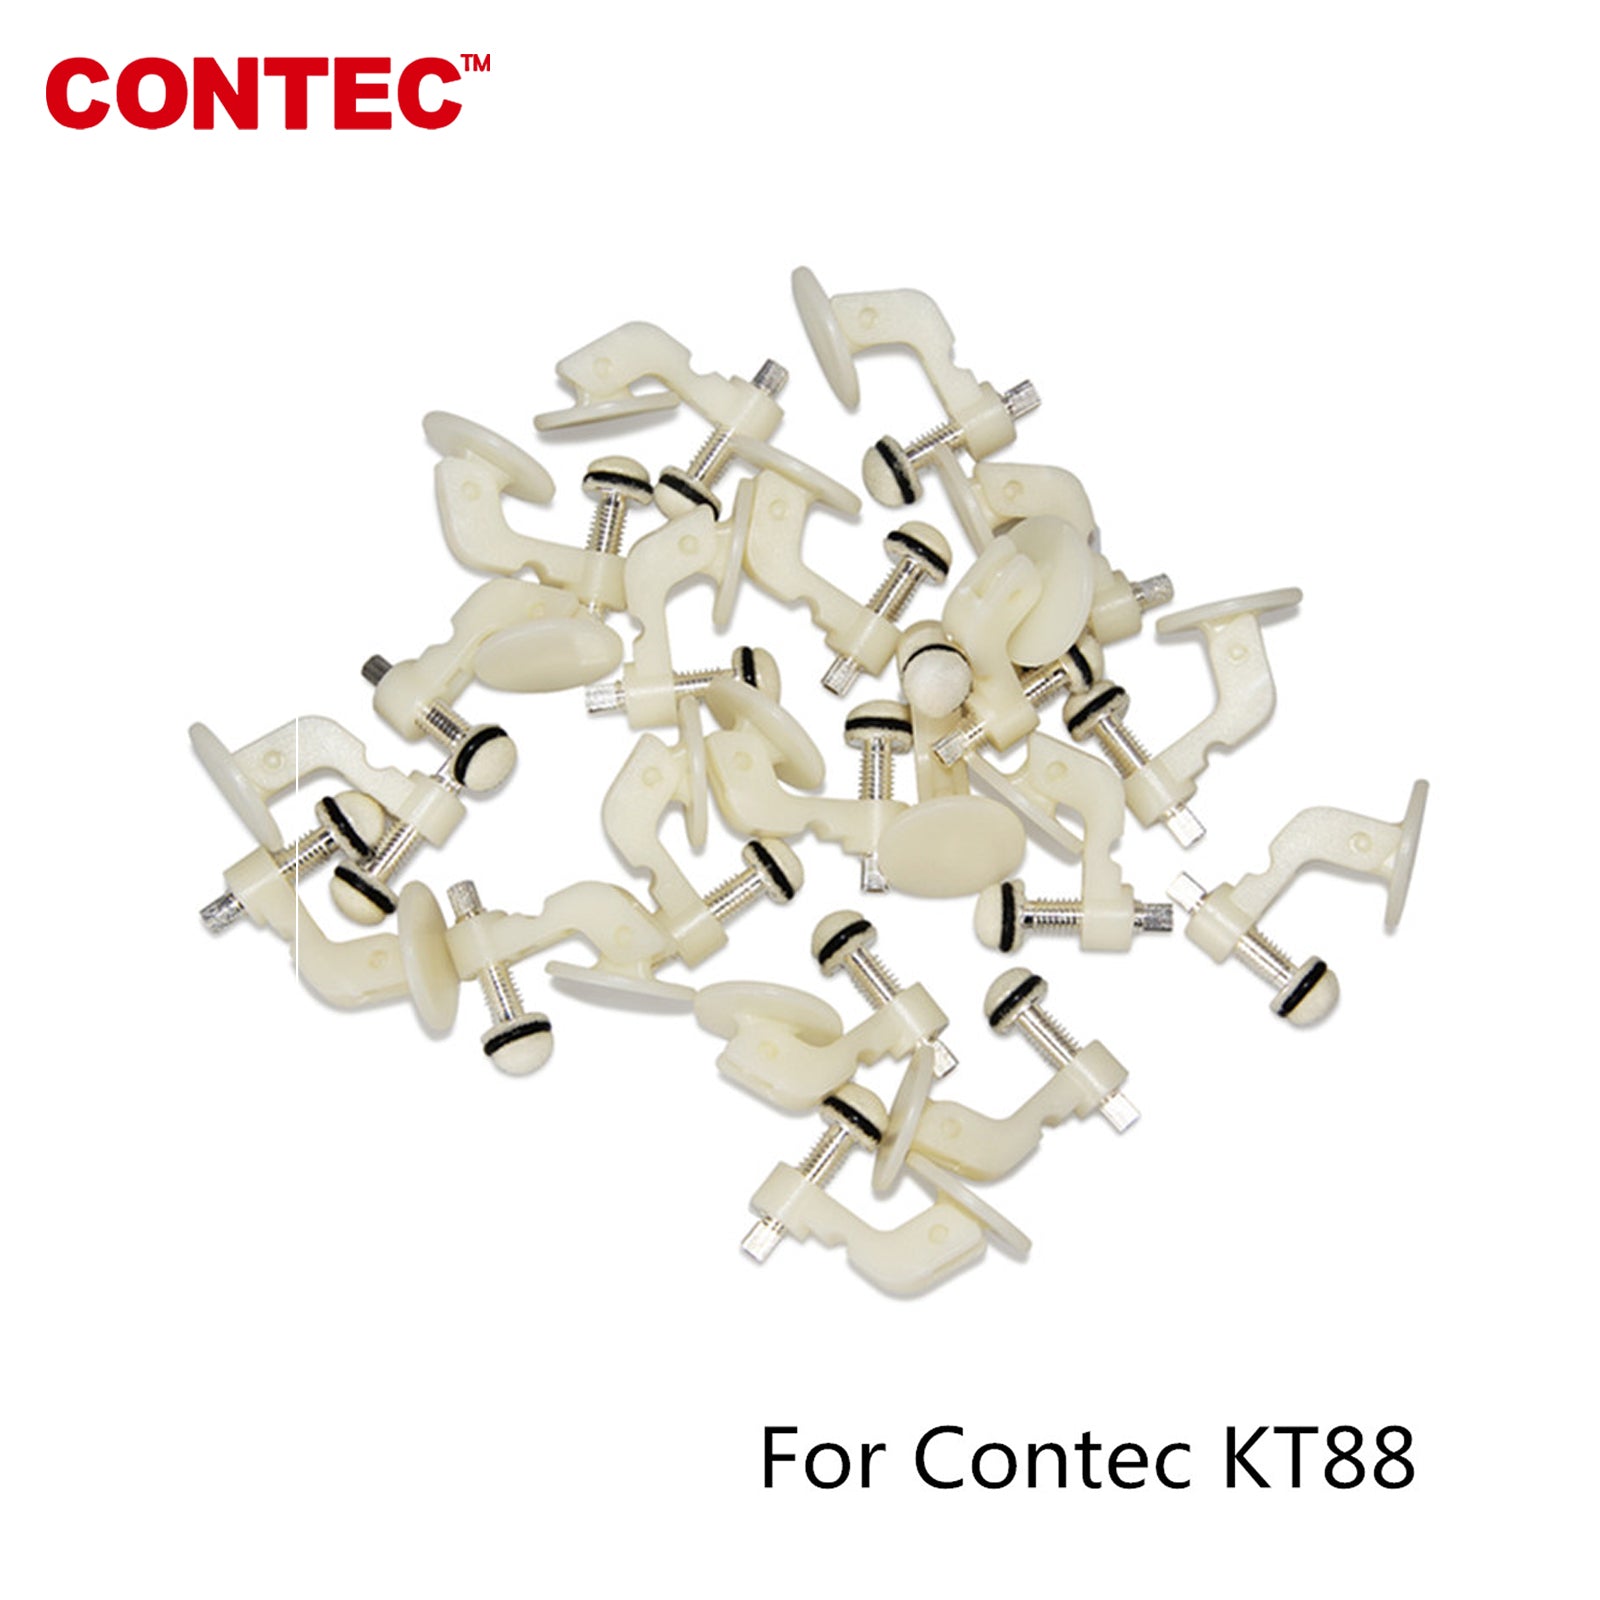 Ship from China  10pcs BridgeType EEG Electrodes For CONTEC EEG&Mapping KT88,KT88-2400,KT88-3200